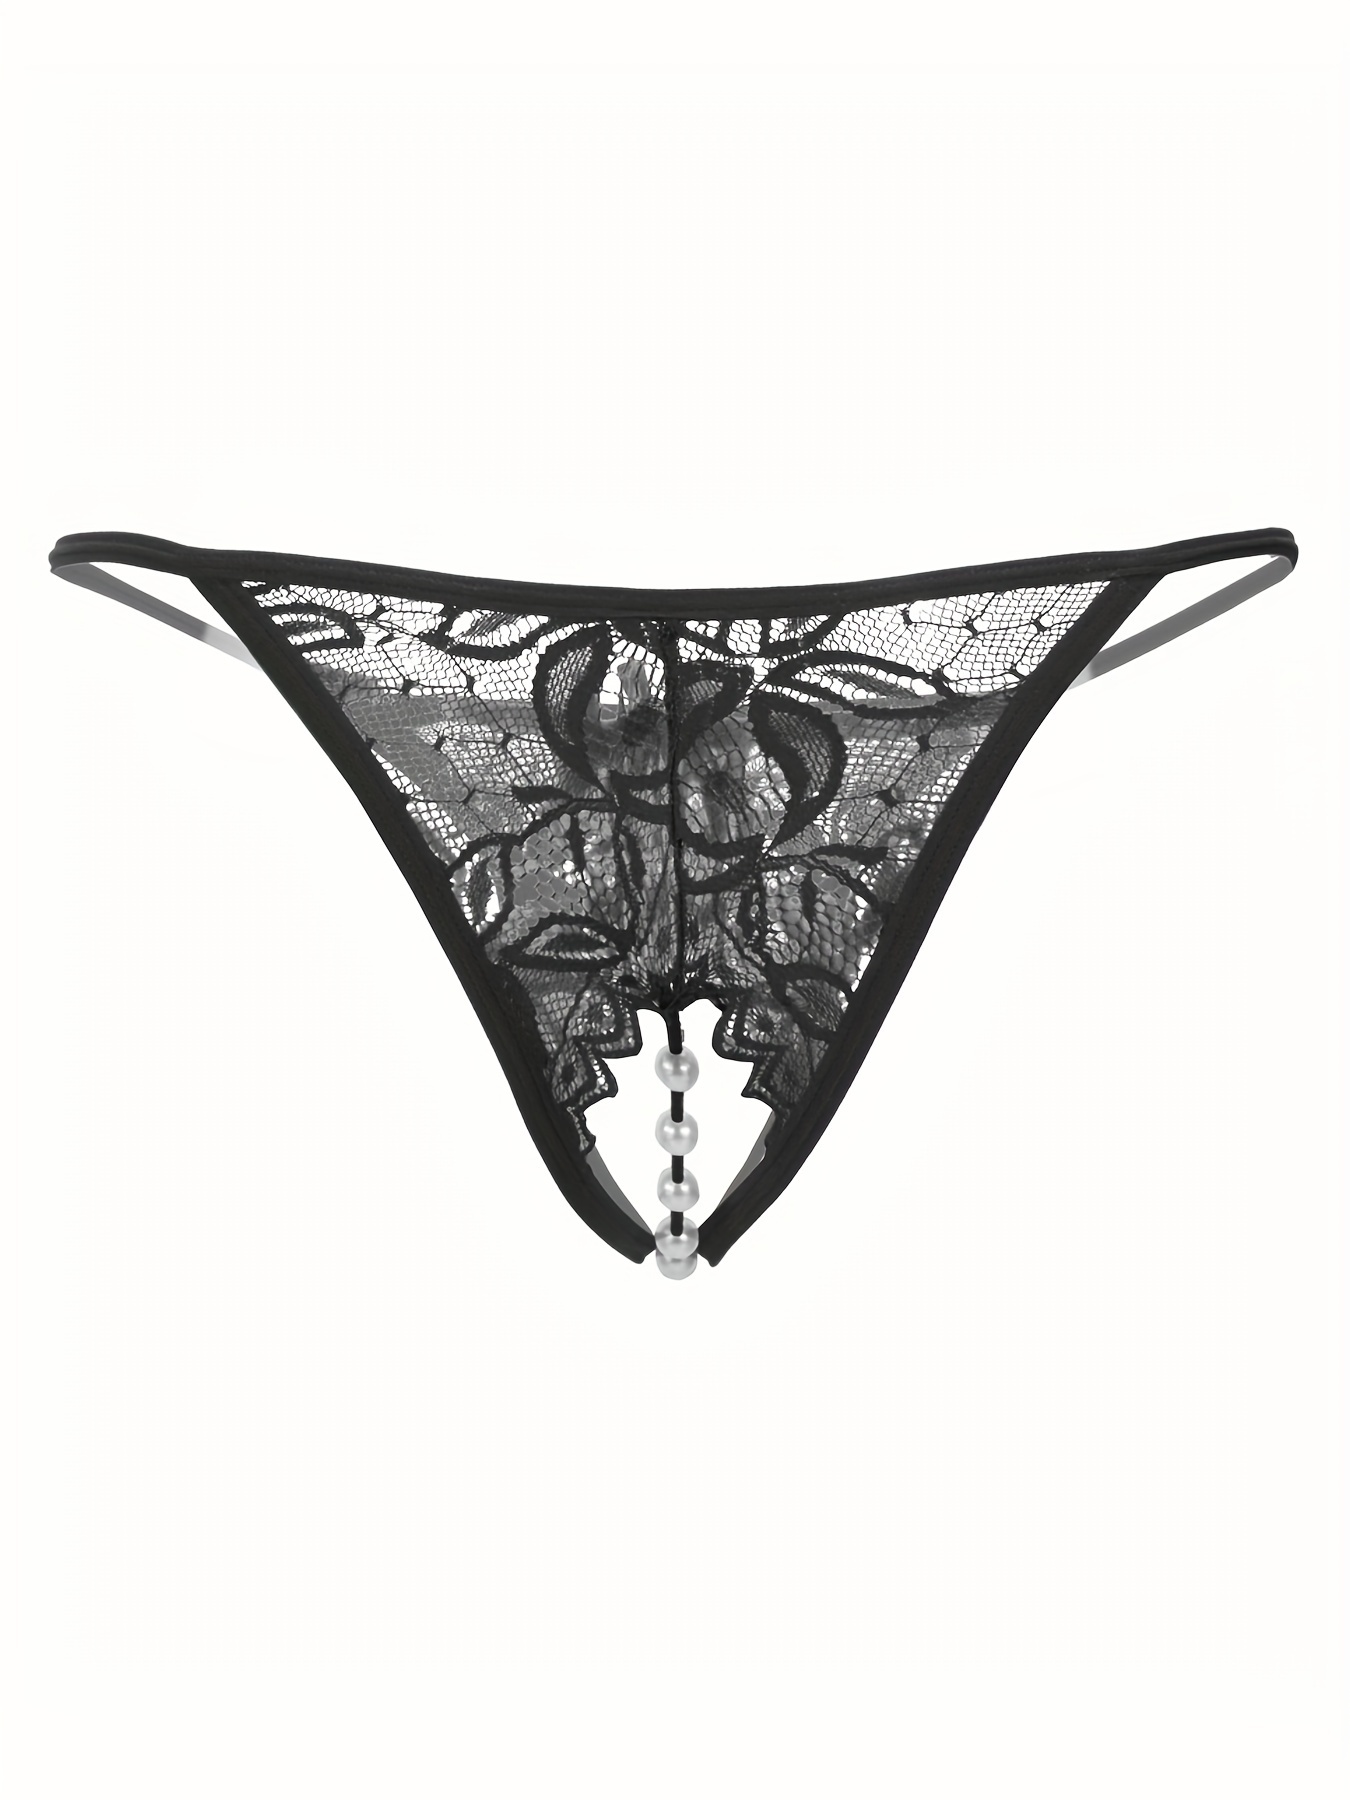 Lace Flower Sexy Pearl Thongs Tanga T Back Panties Underwear Ladies Open  Crotch G String T String Knickers Briefs Underpants From Qiuqian1213, $1.83